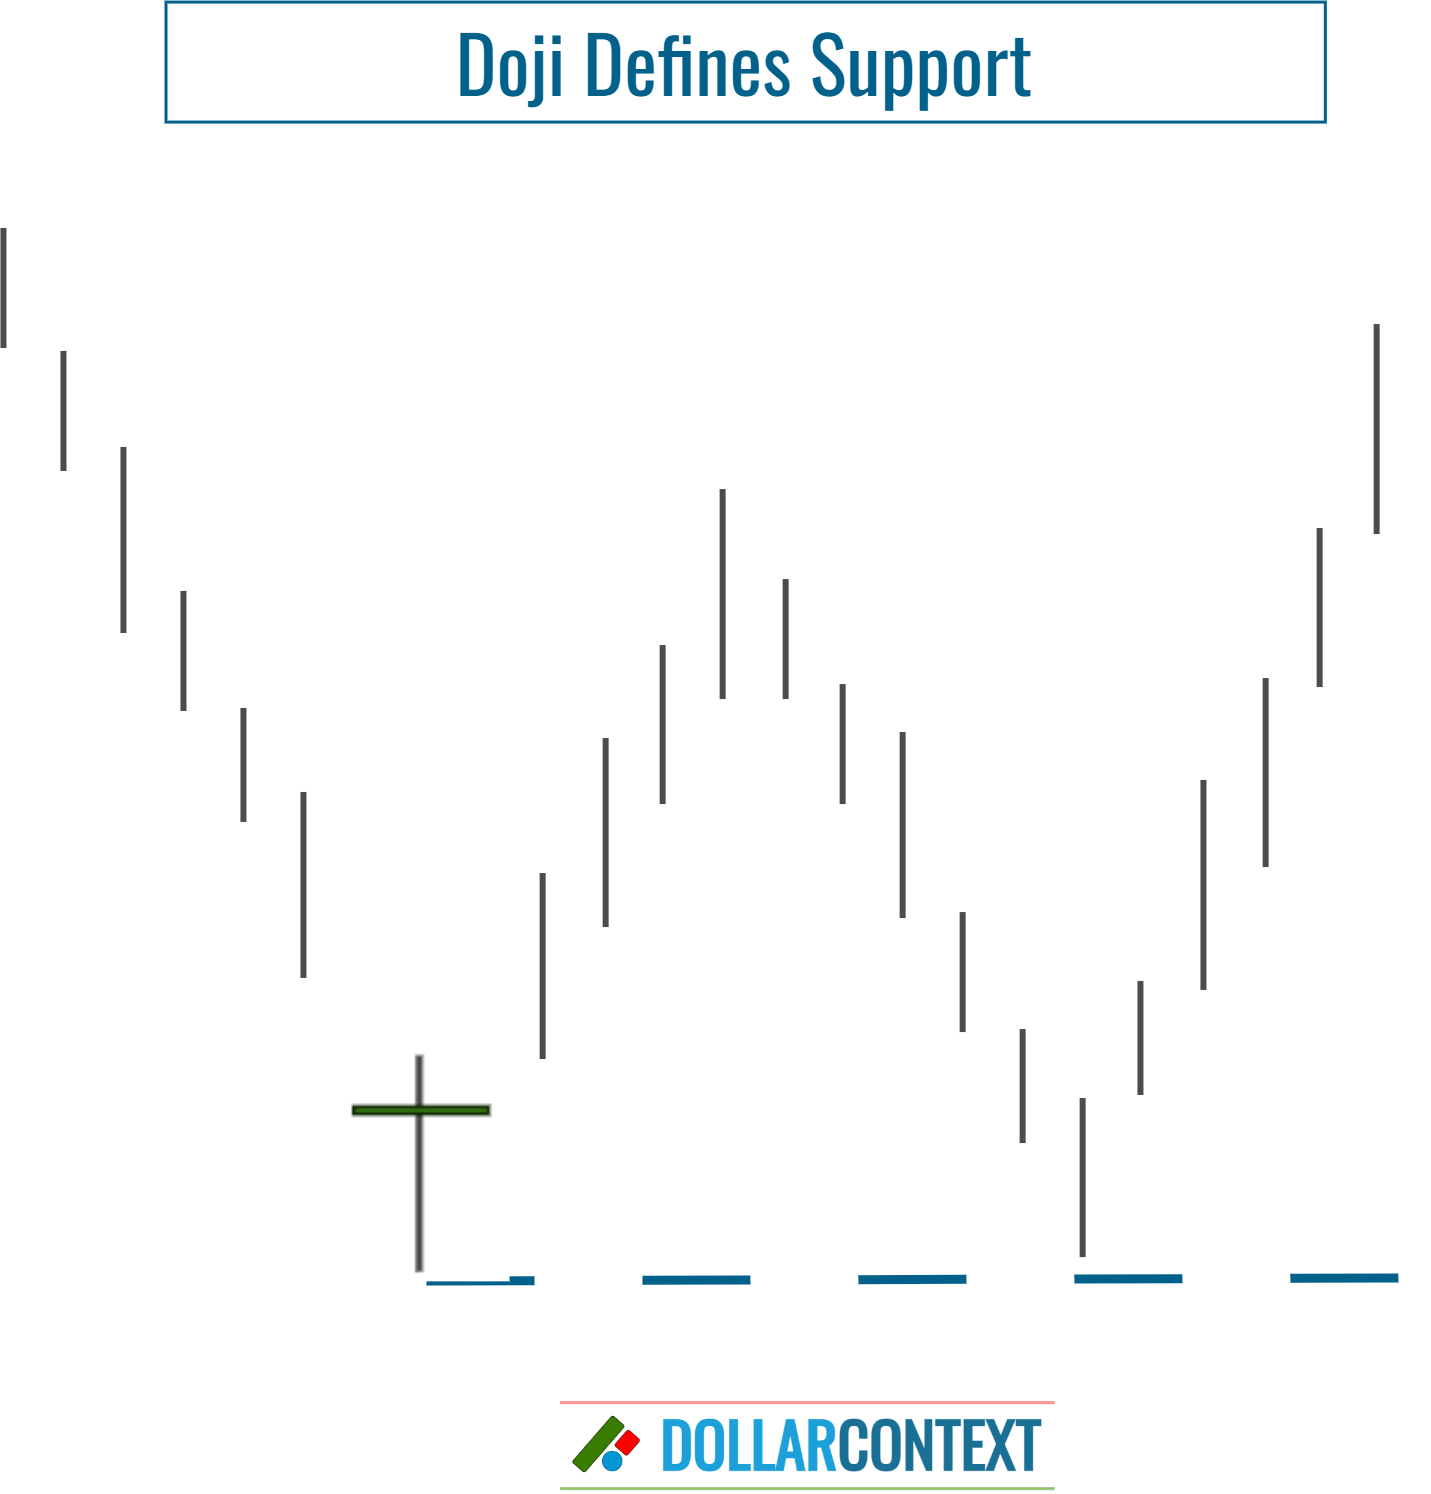 Doji Defines a New Support Zone After a Downtrend